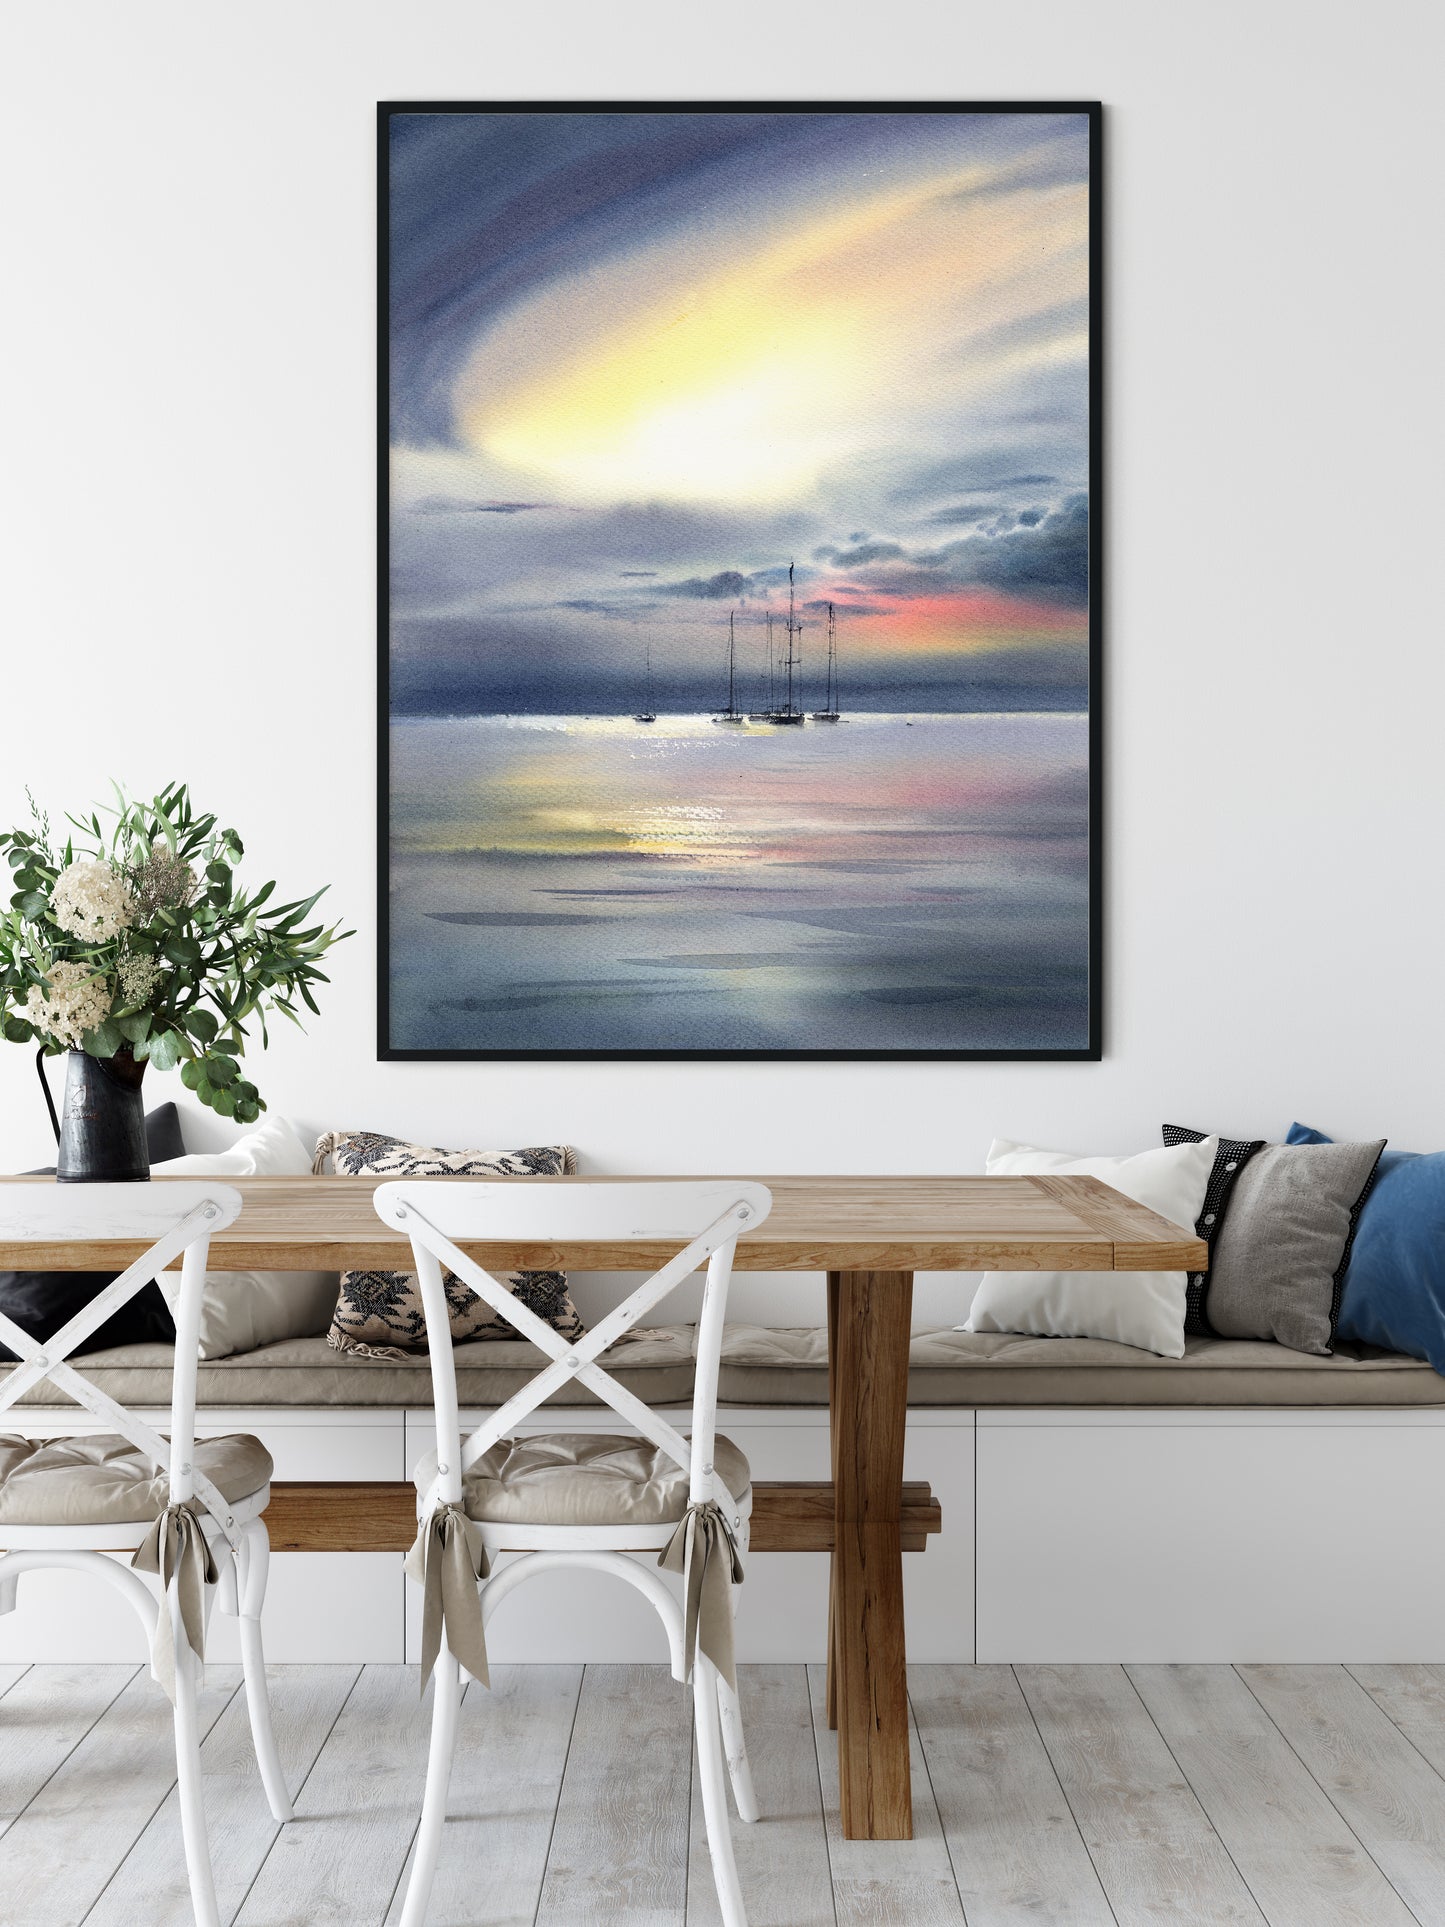 Nautical Home Decor - Extra Large Print of Seascape Painting, Perfect Beach House Gift for Art Lovers